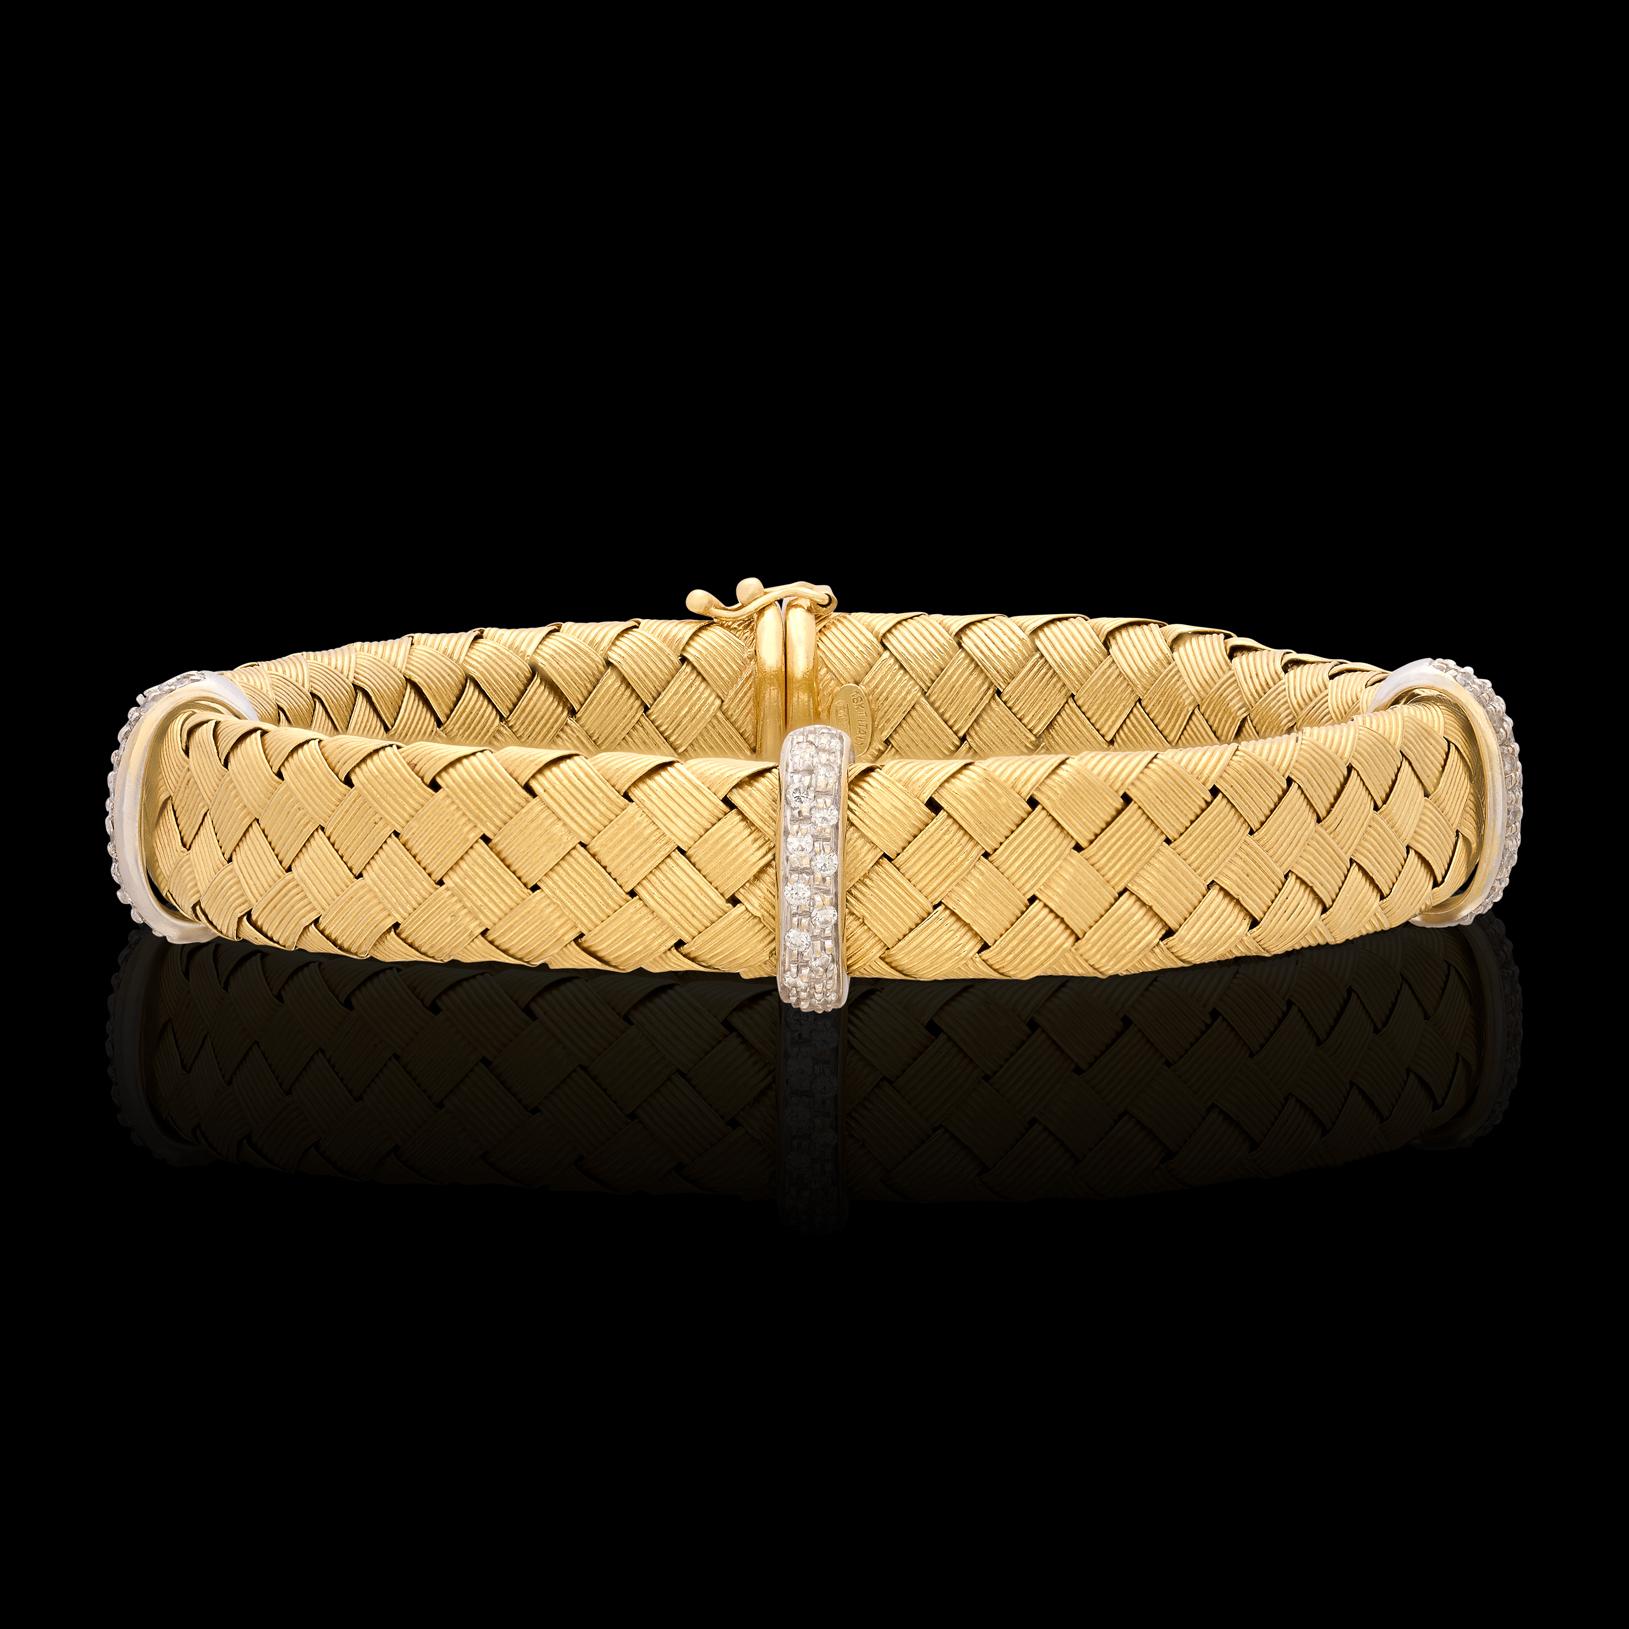 Style for days! This fashionable two-tone 18 karat gold bracelet features 0.40 carats of accent diamonds and a rich blue cabochon cut sapphire, perfectly set amongst a mesh style gold bangle. The bracelet weighs 34 grams and is a size 7 1/2. The